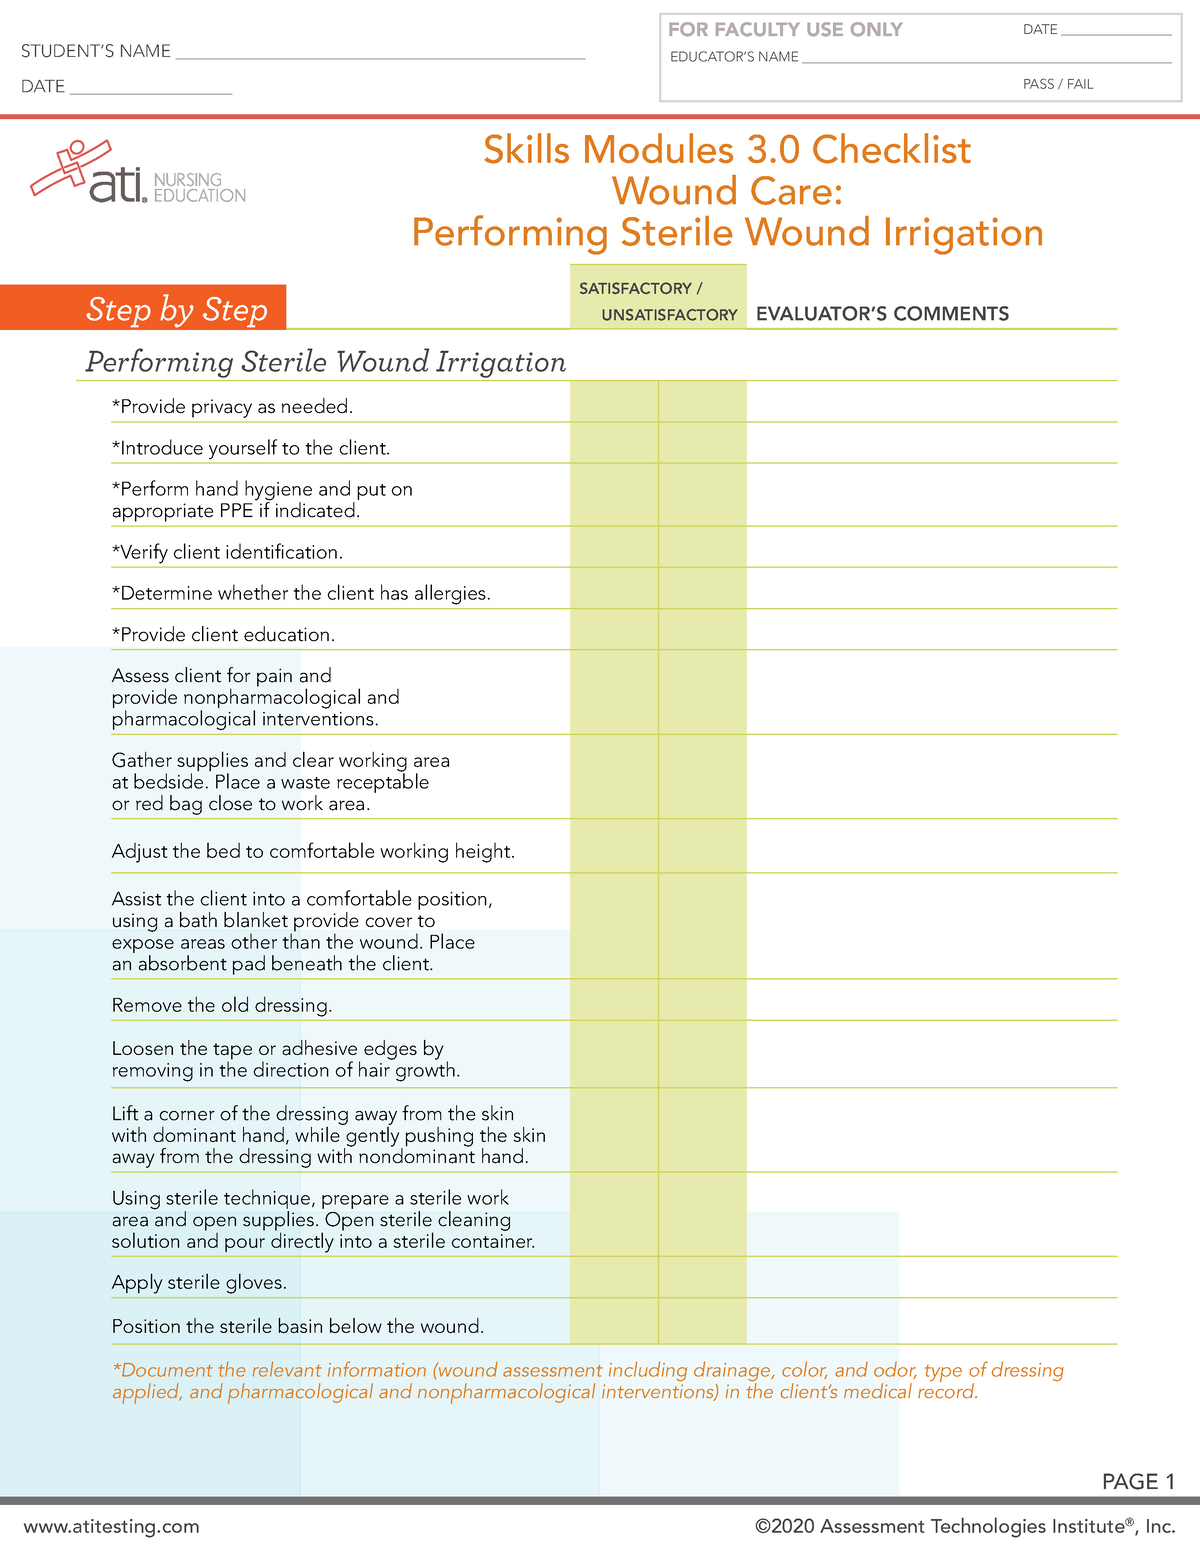 Ati Wound Care Performing sterile wound irrigation checklist EDUCATOR